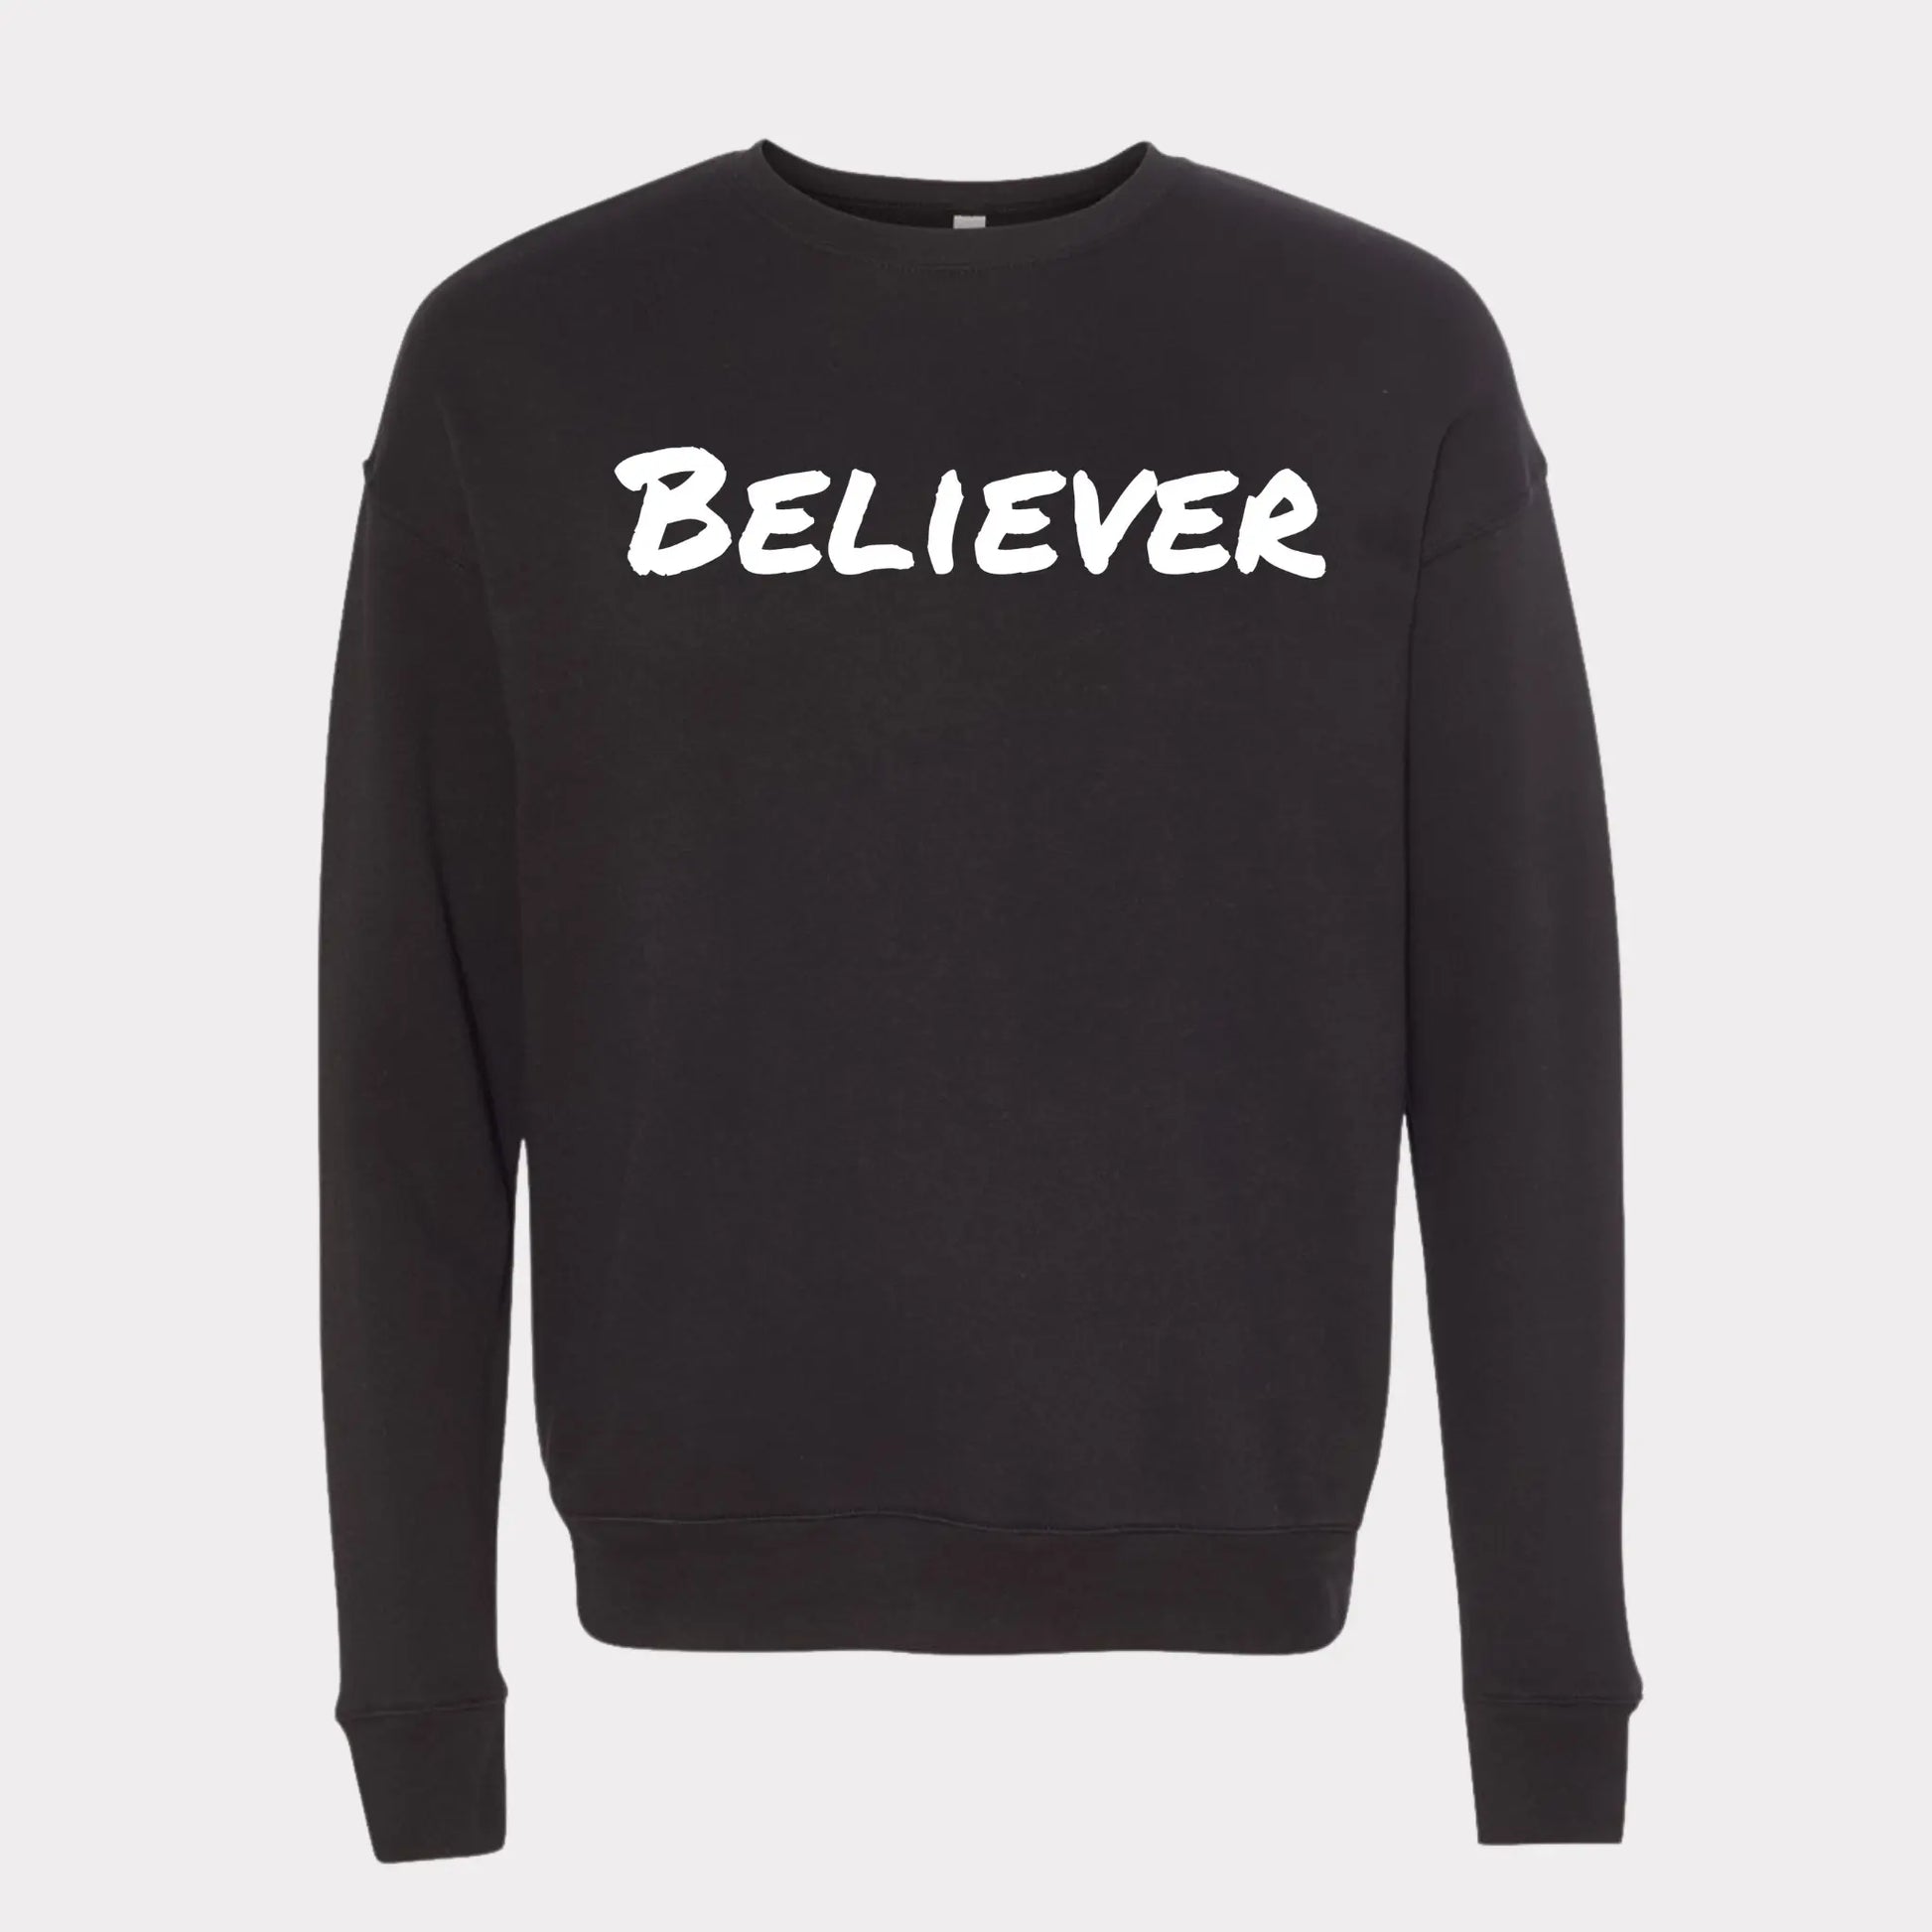 This Sweeatshirt is all black with a crew neck style. The words Believer are pressed on the shirt in bold white letters. Believer is written across the chest, stretching from sholder to shoulder. The sweatshirt this comftorable and fitted. Size up for an oversized look. Edit alt text. On a Nuetral Colored back ground. The back reads John 3:16 on the tail of the sweatshirt. 